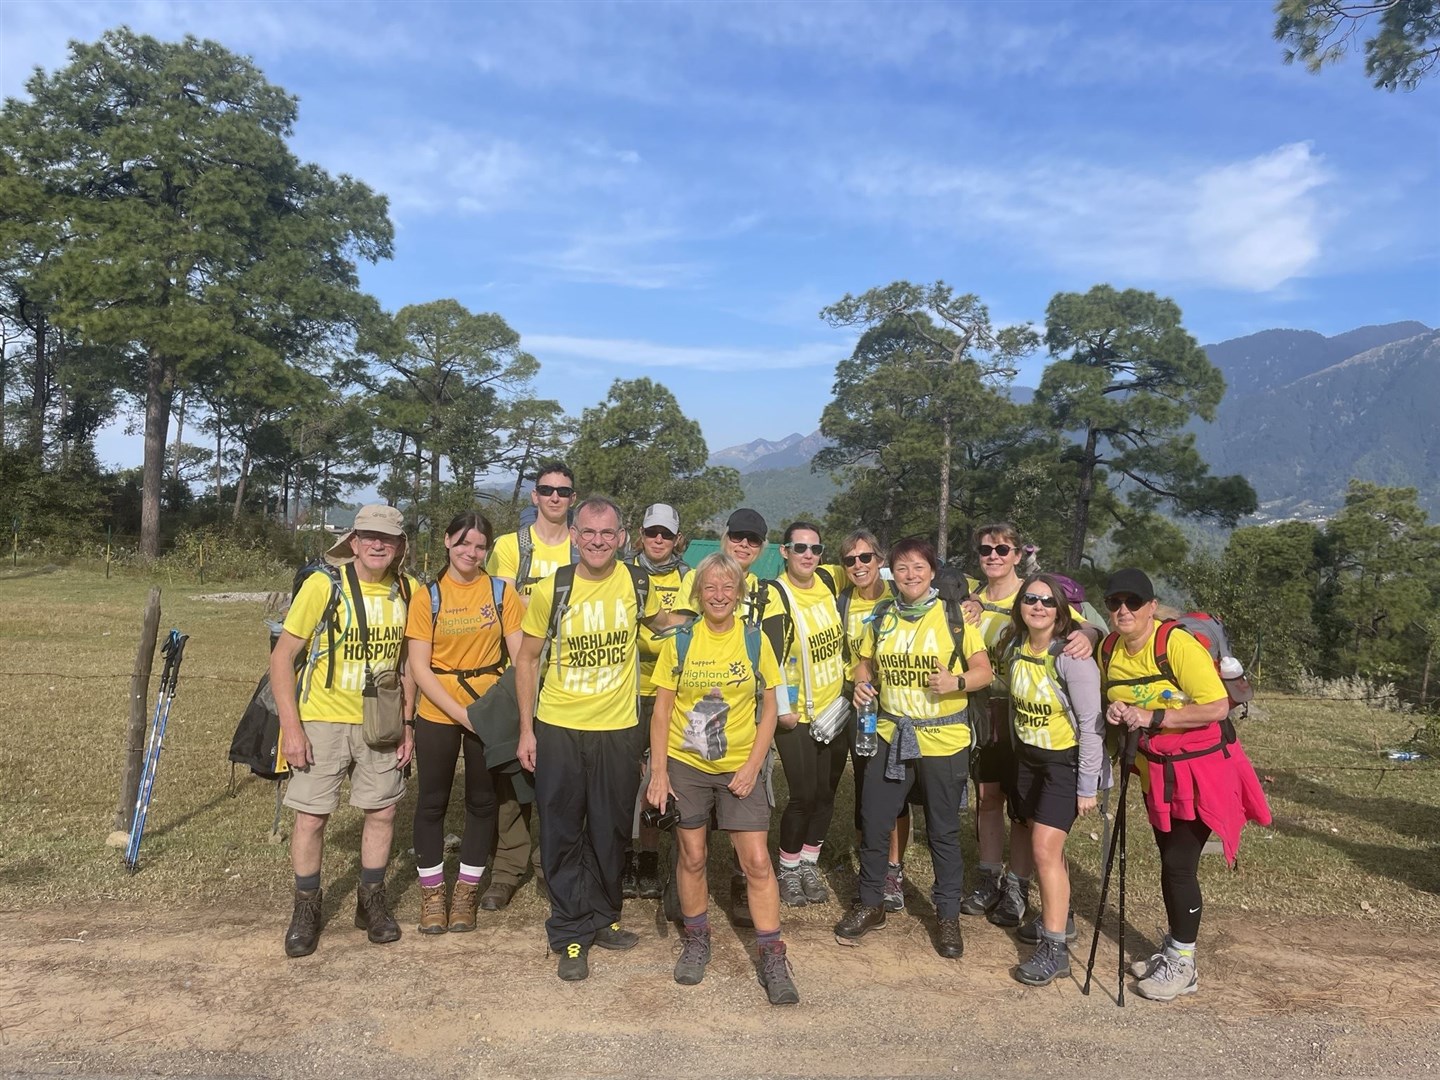 The group at the start of the Himalayan trek.